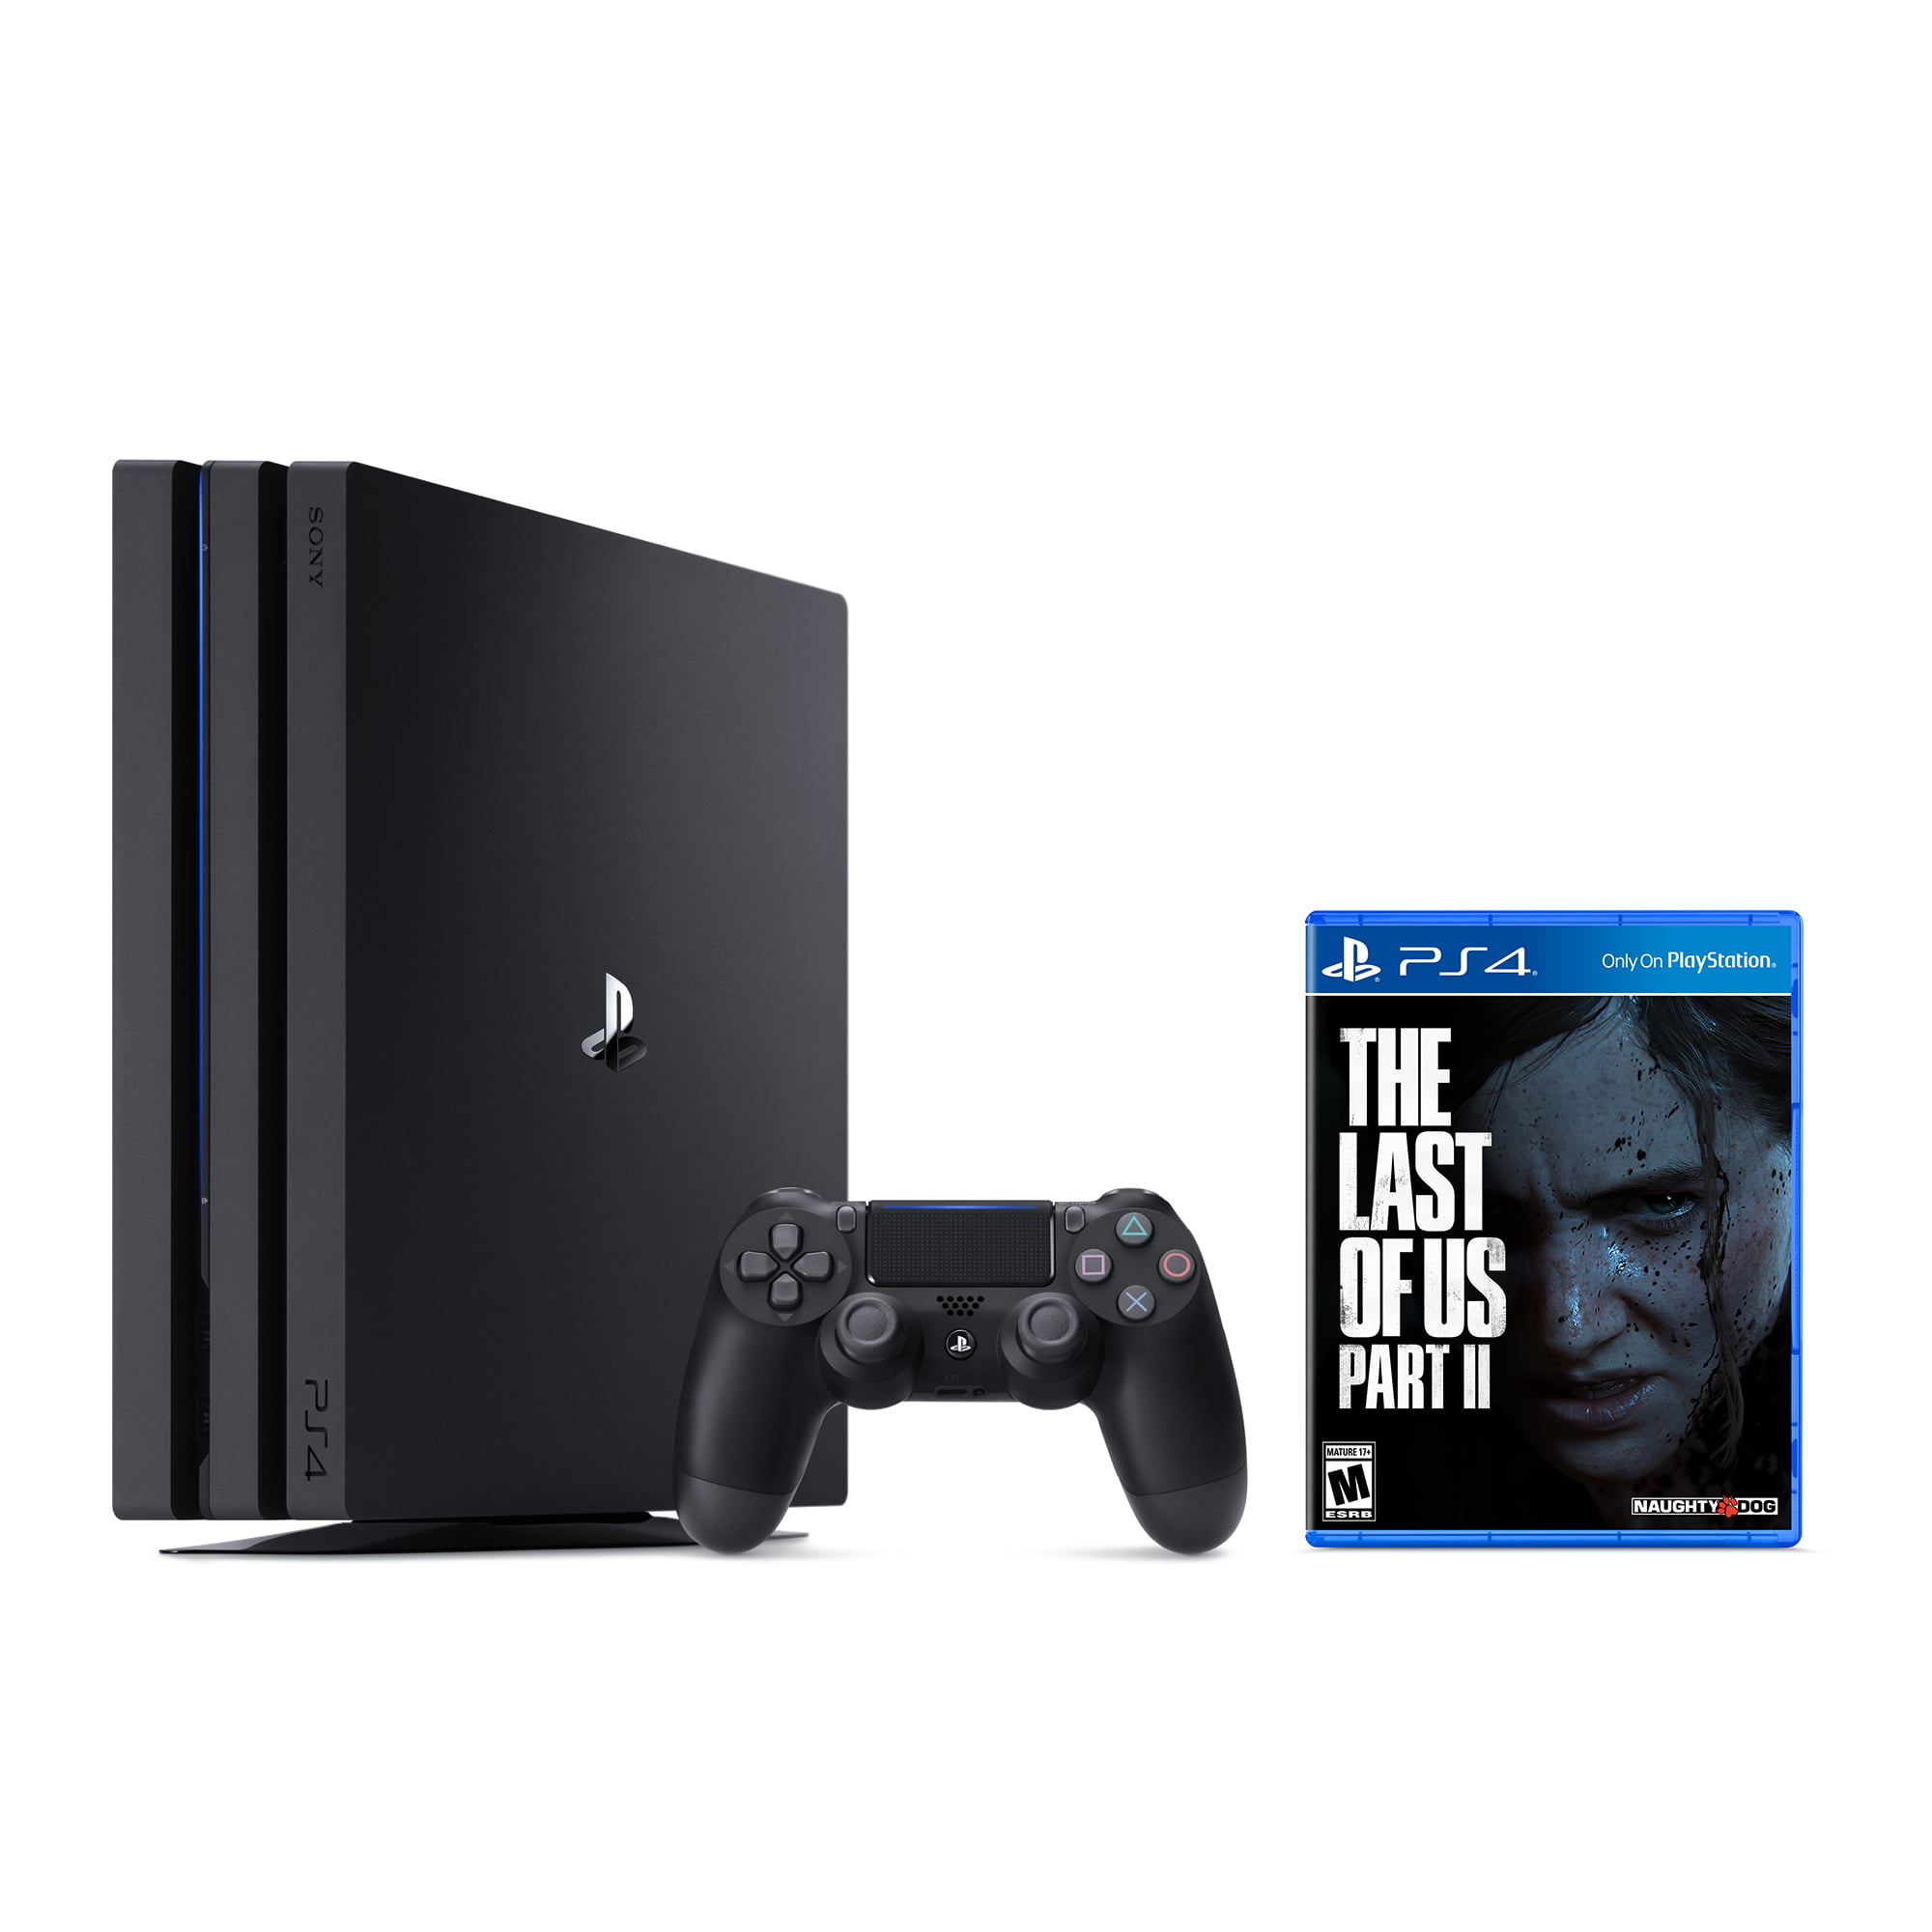 Undulate Update Great PlayStation 4 Pro The Last of Us Part 2 Bundle - PS4 Pro 1TB Jet Black 4K  HDR Gaming Console Bundle With The Last of Us Part II - New Game! -  Walmart.com